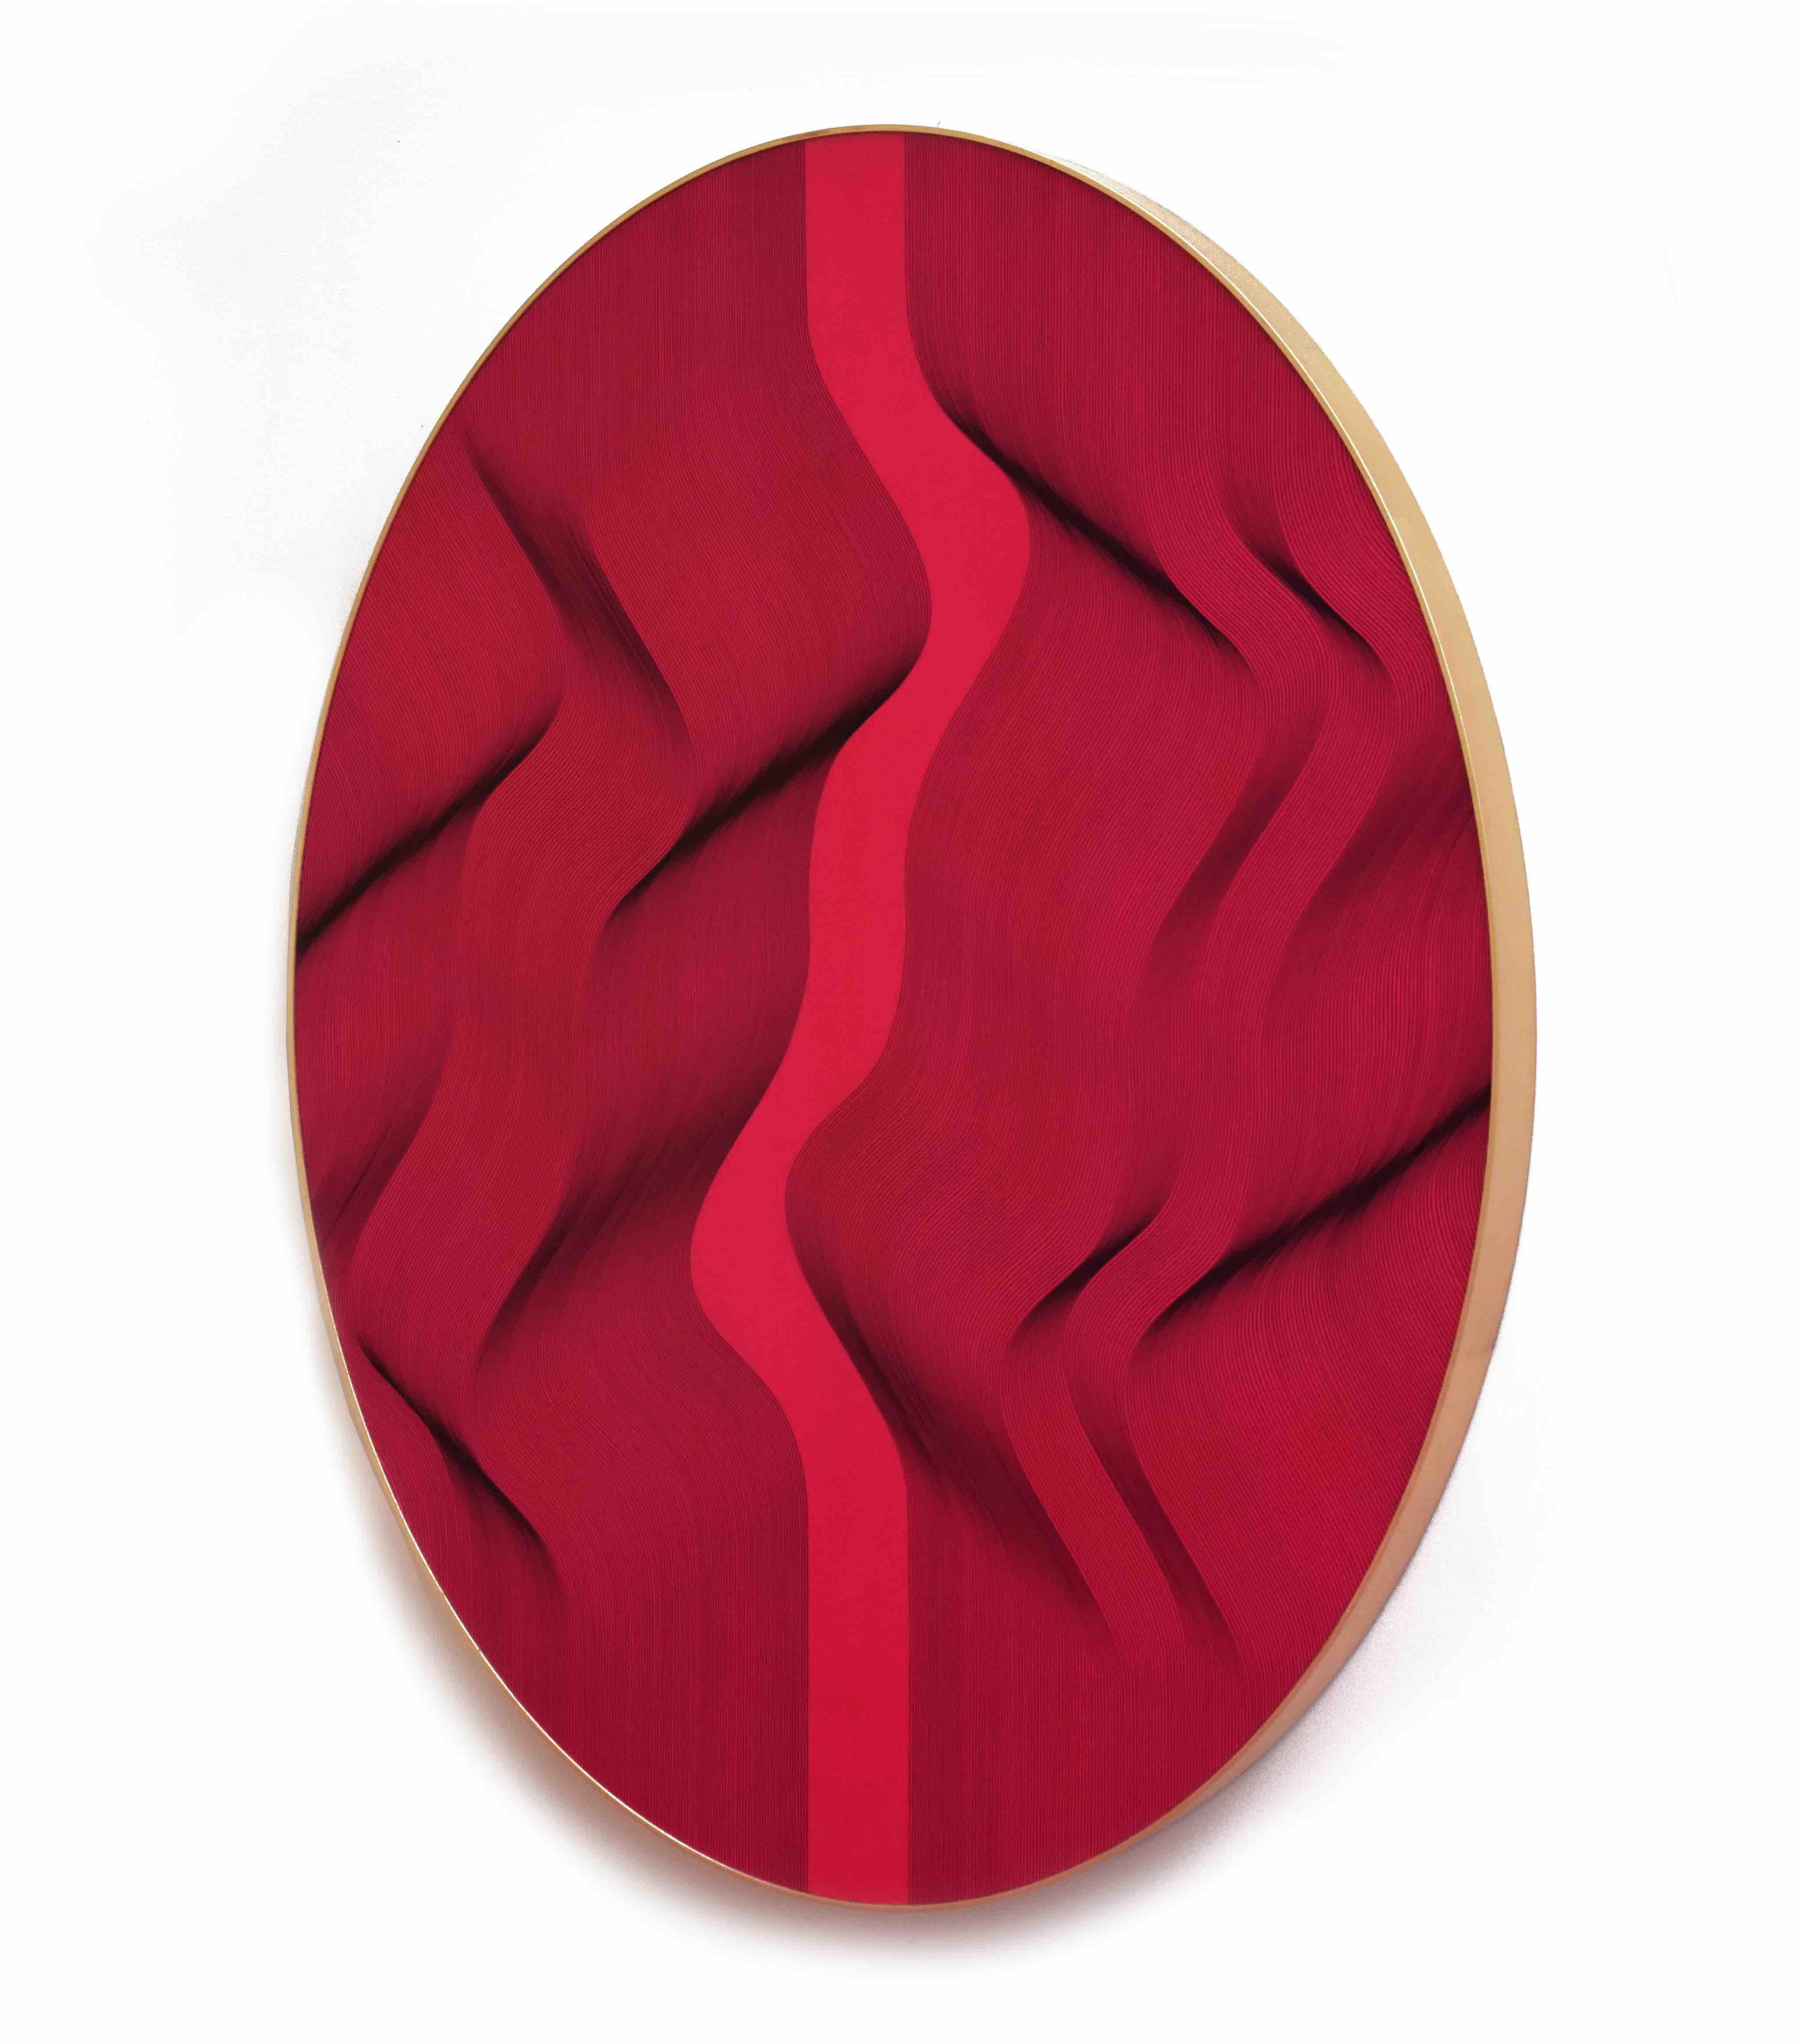 Red Oval 2022 - geometric abstract painting - Painting by Roberto Lucchetta